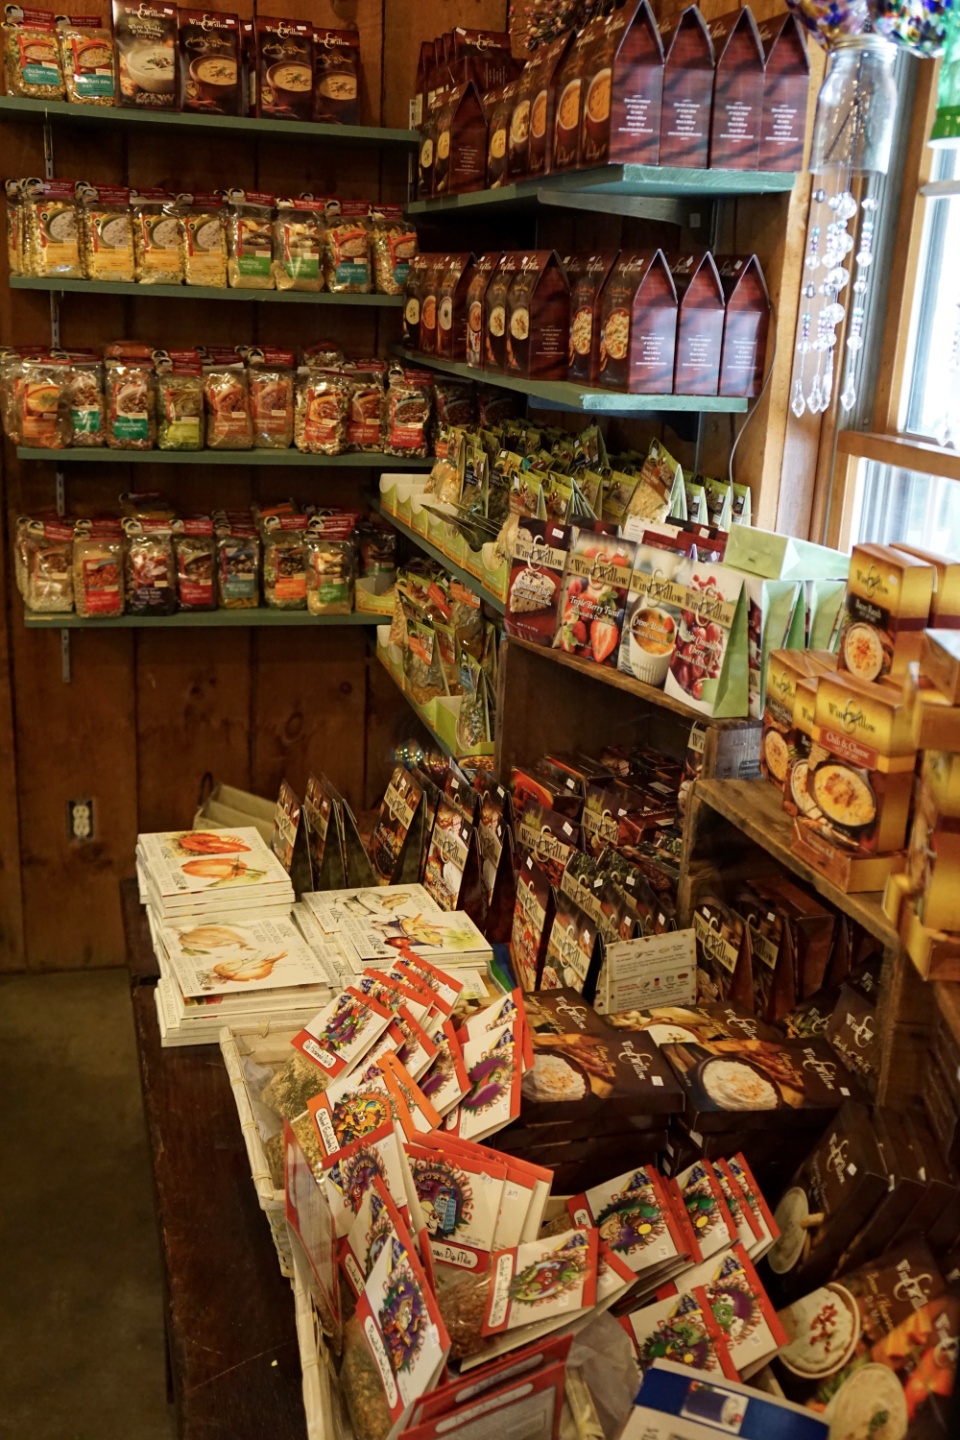 Country Wagon Produce gift shop